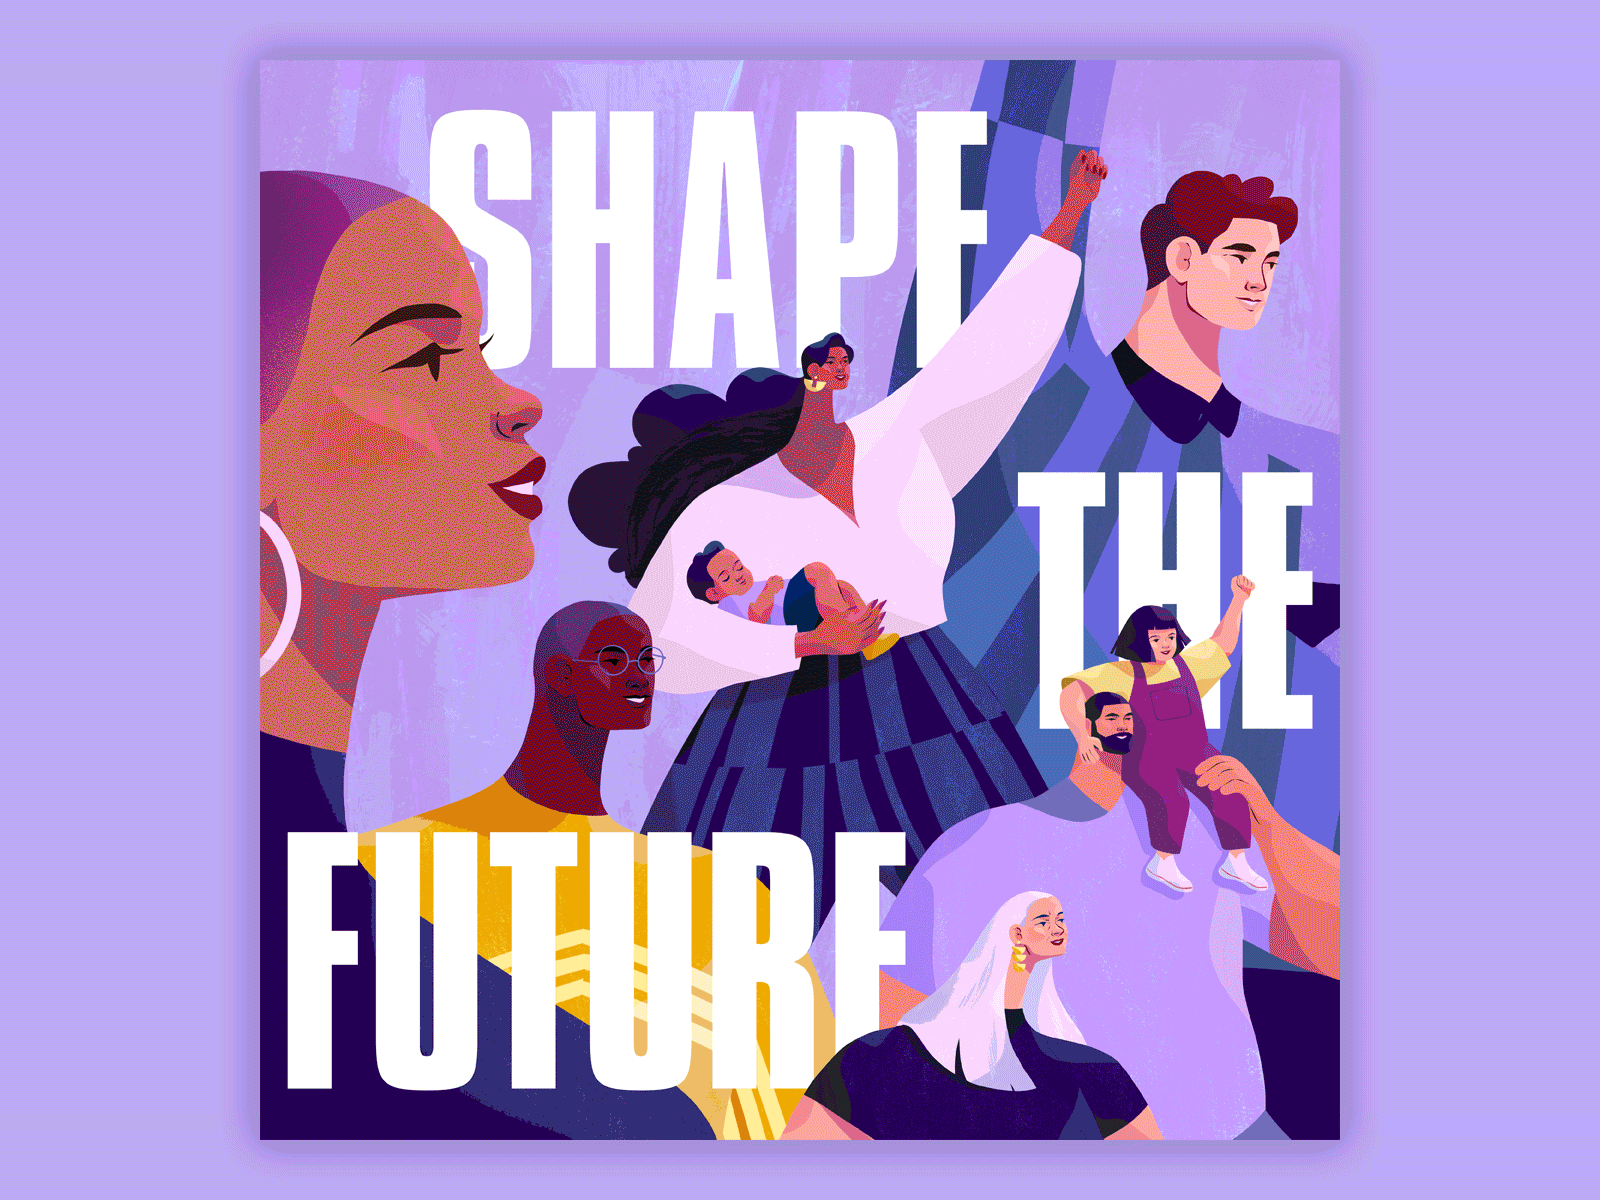 Shape the Future by submitting your art work!